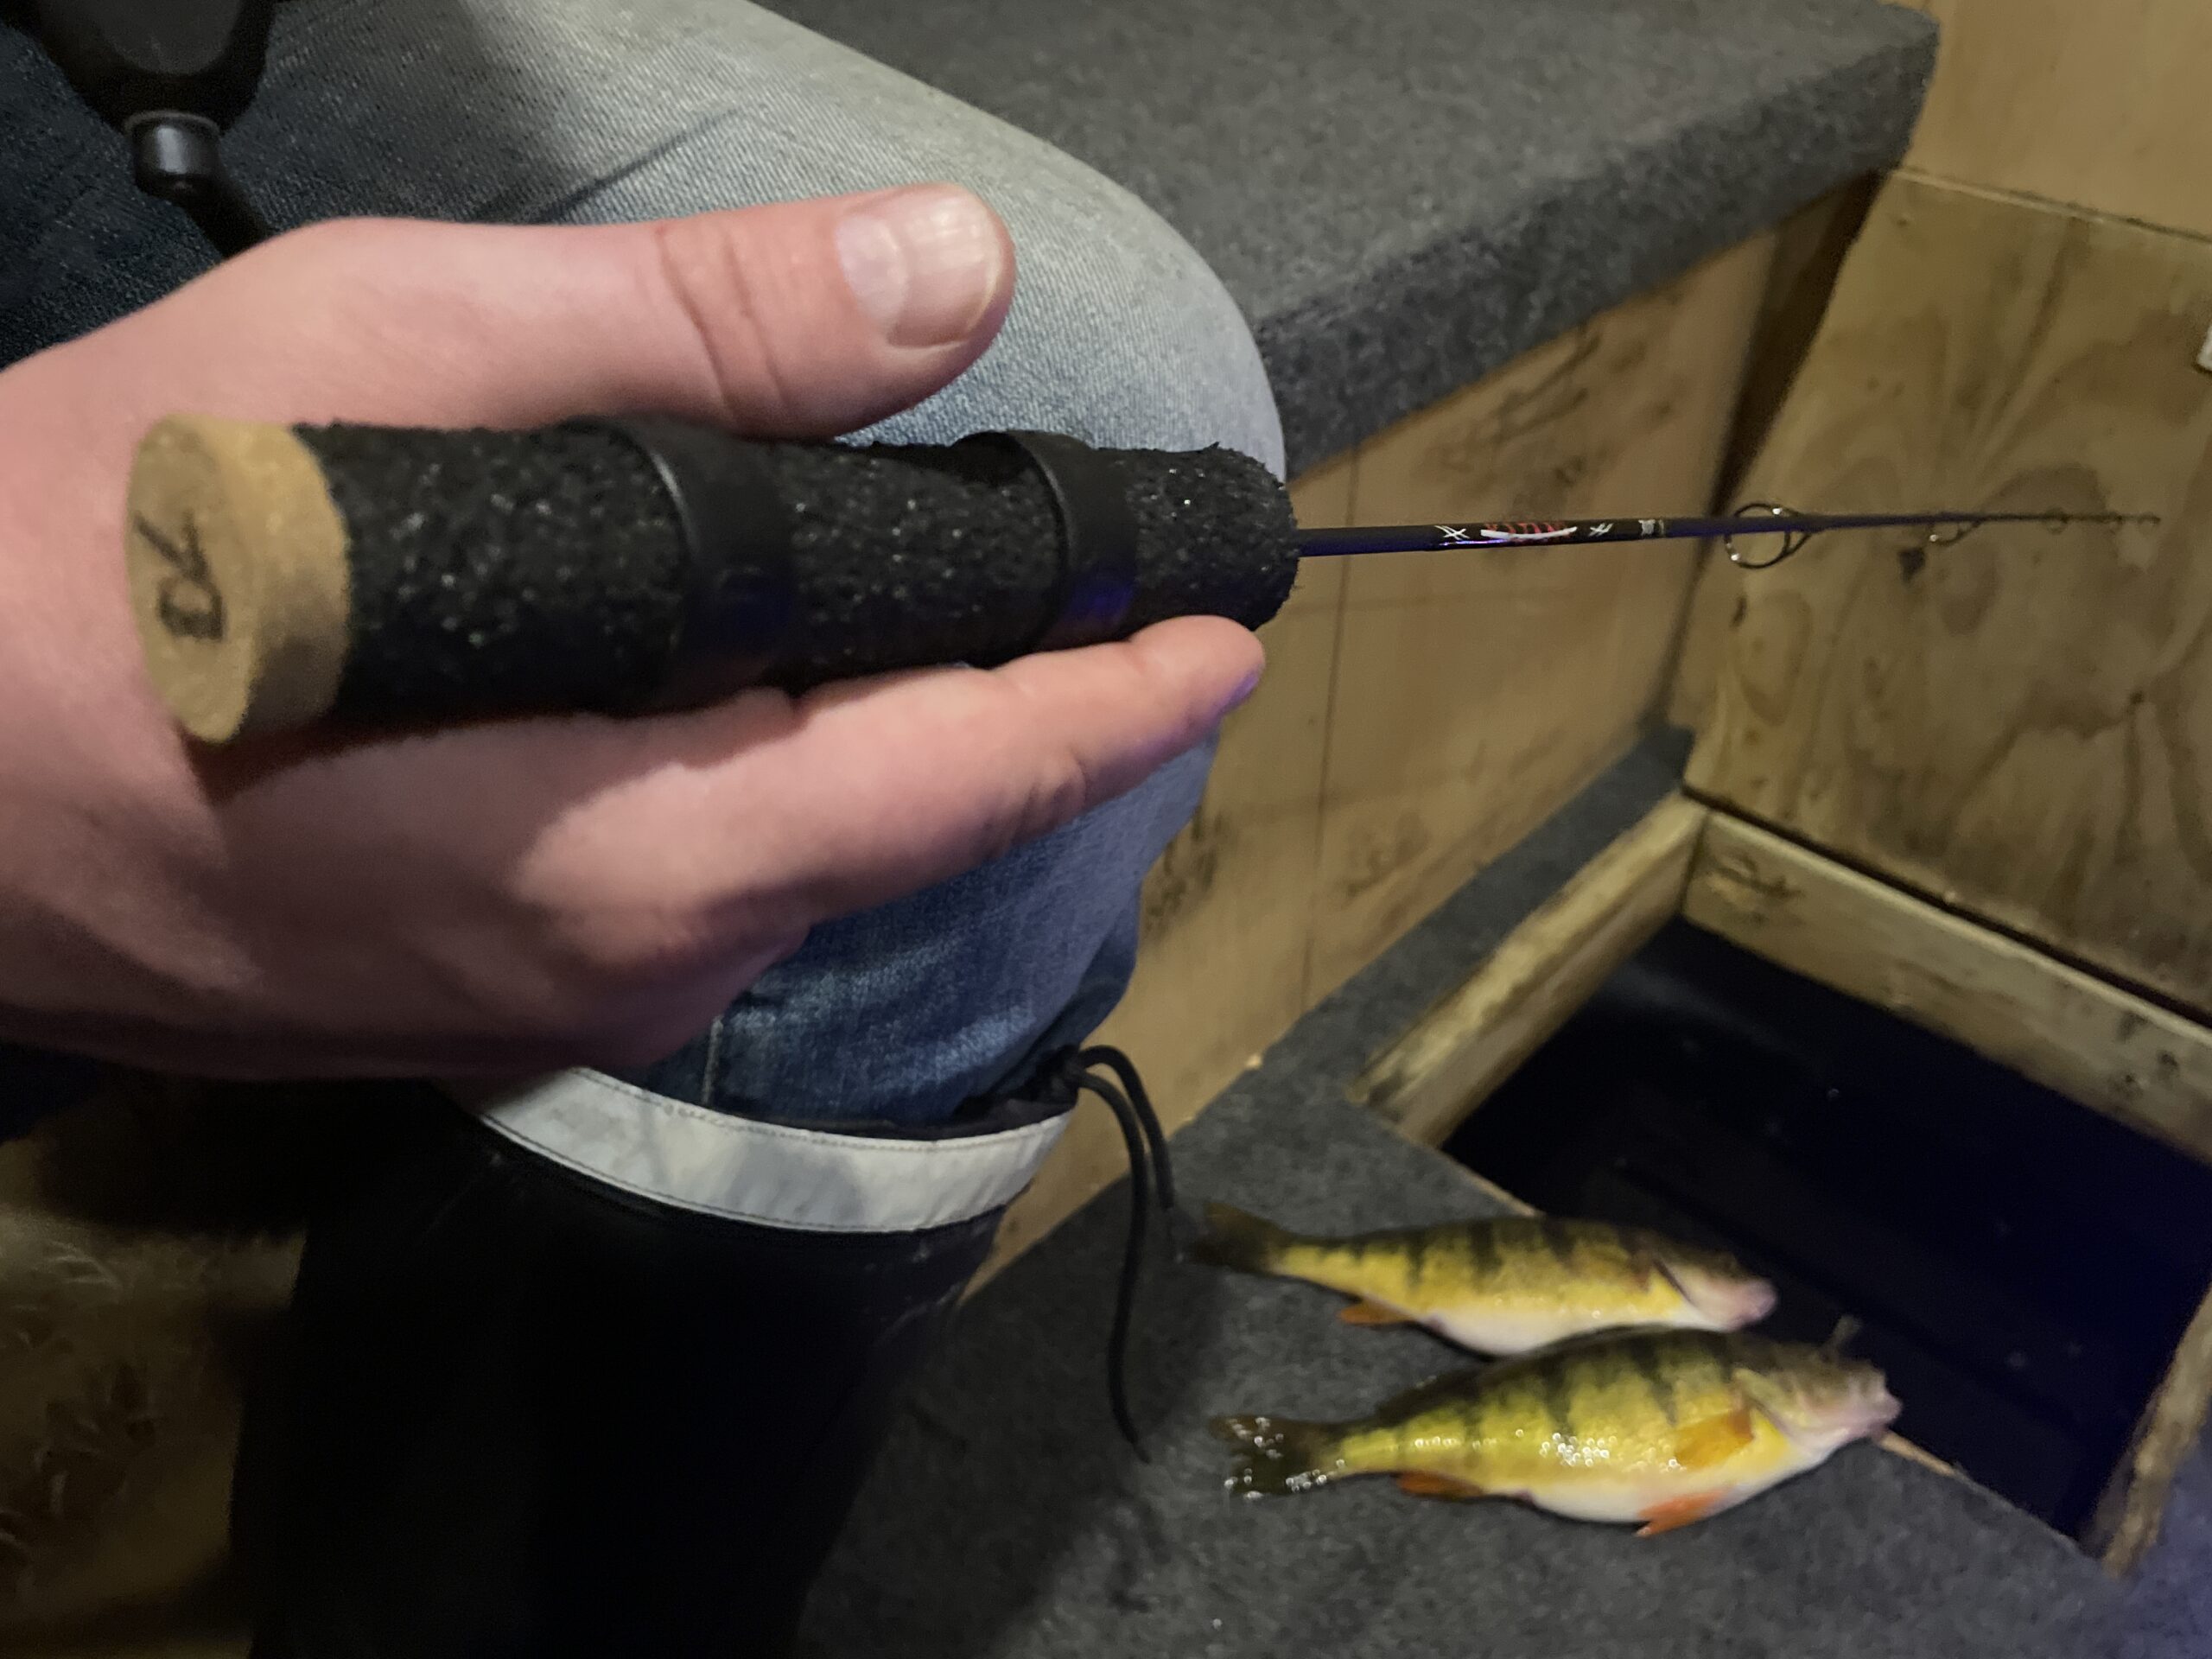 The Katana is one of the best values in ice fishing rods.